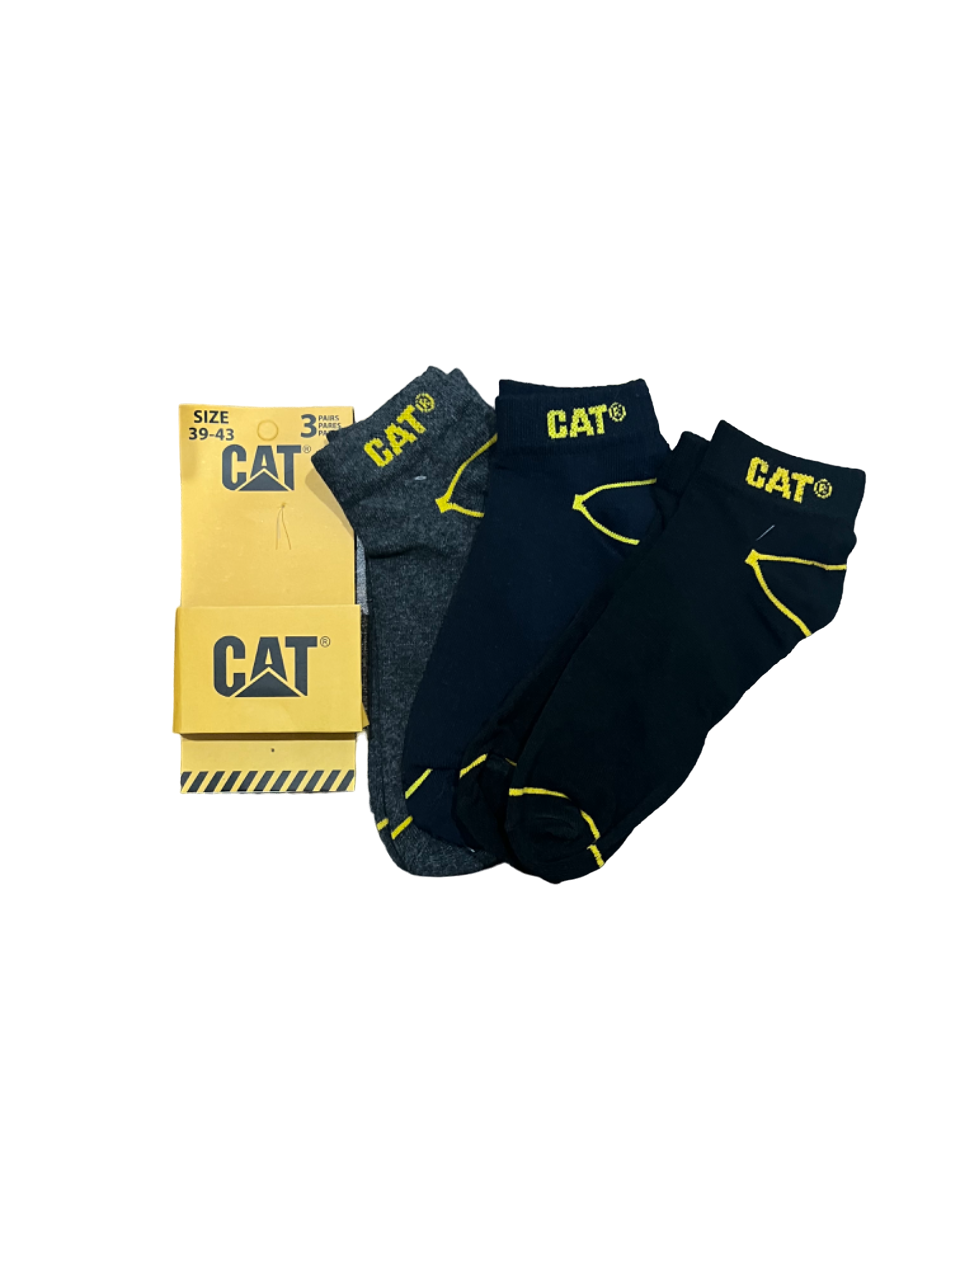 C-A-T Ankle Socks ( Pack of 3 )